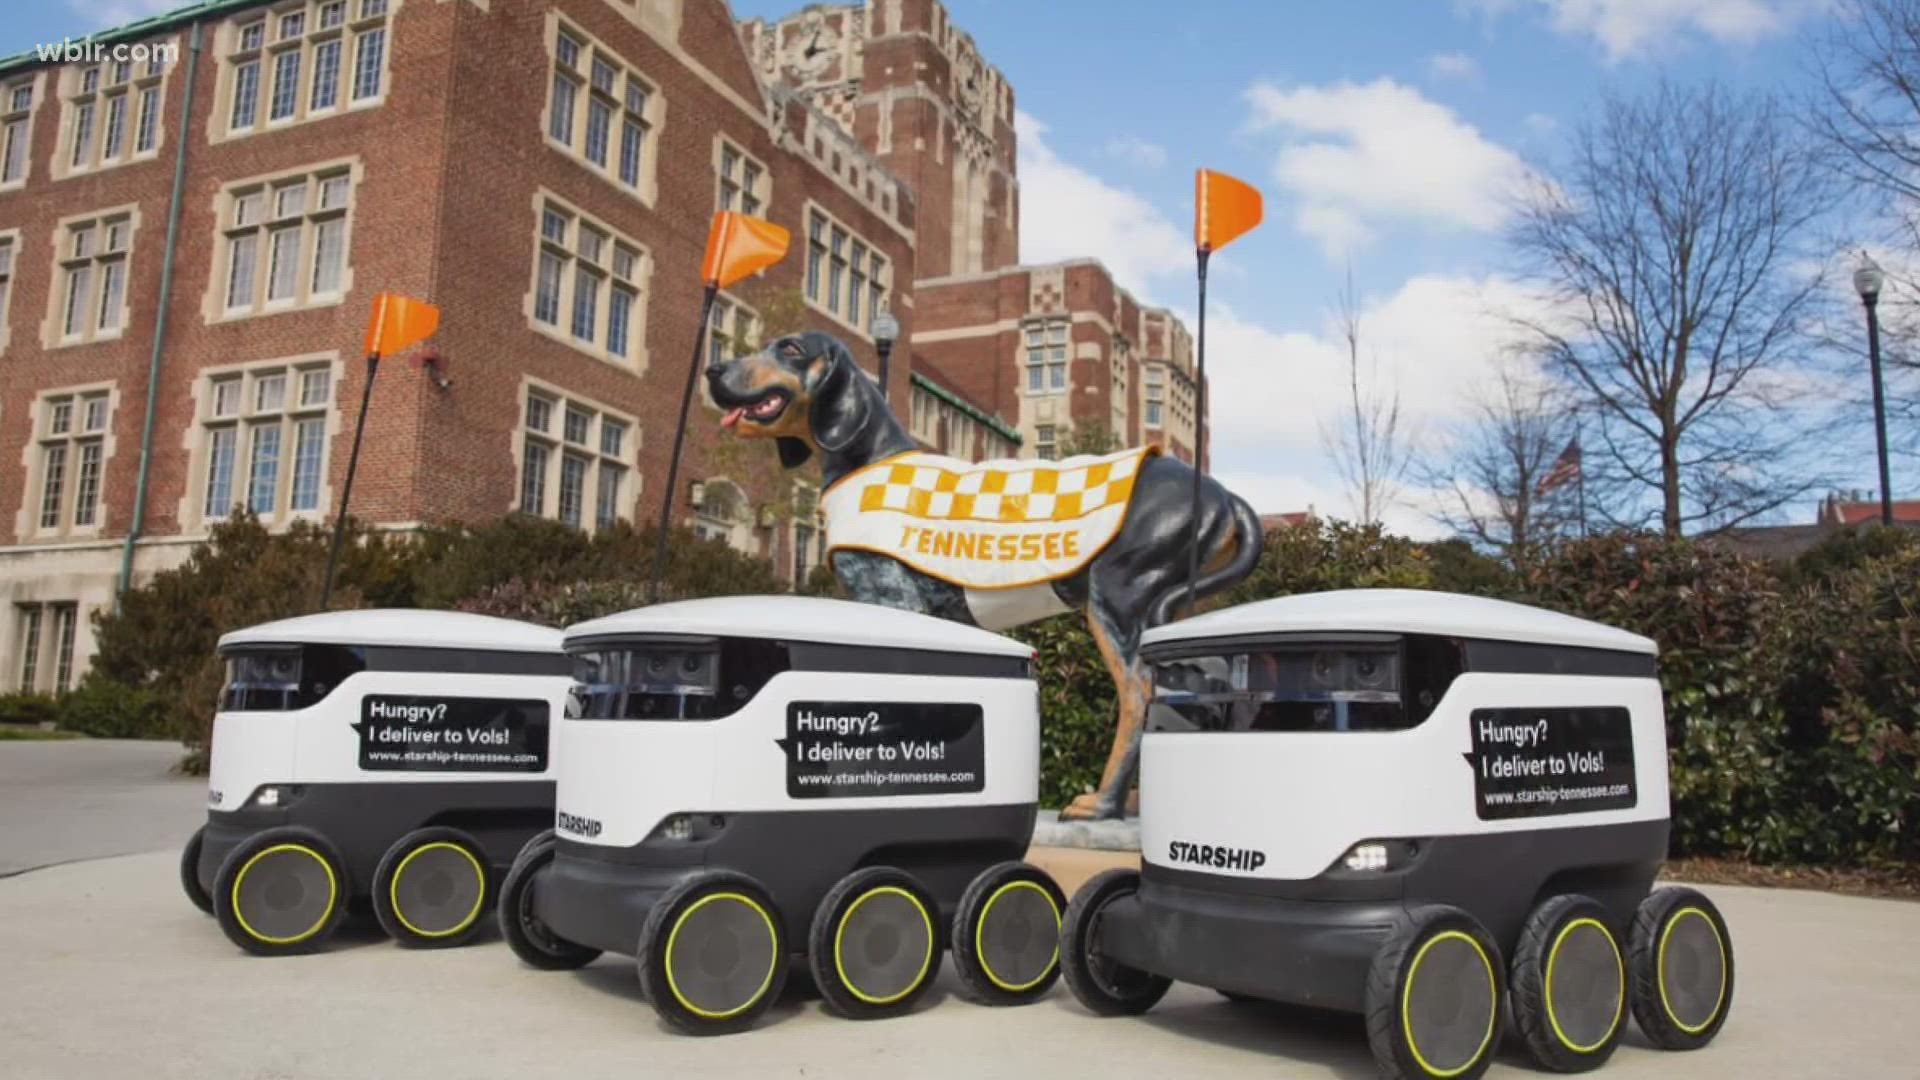 The university announced that these starship on-demand robots will deliver food and drinks from 16 campus dining locations.